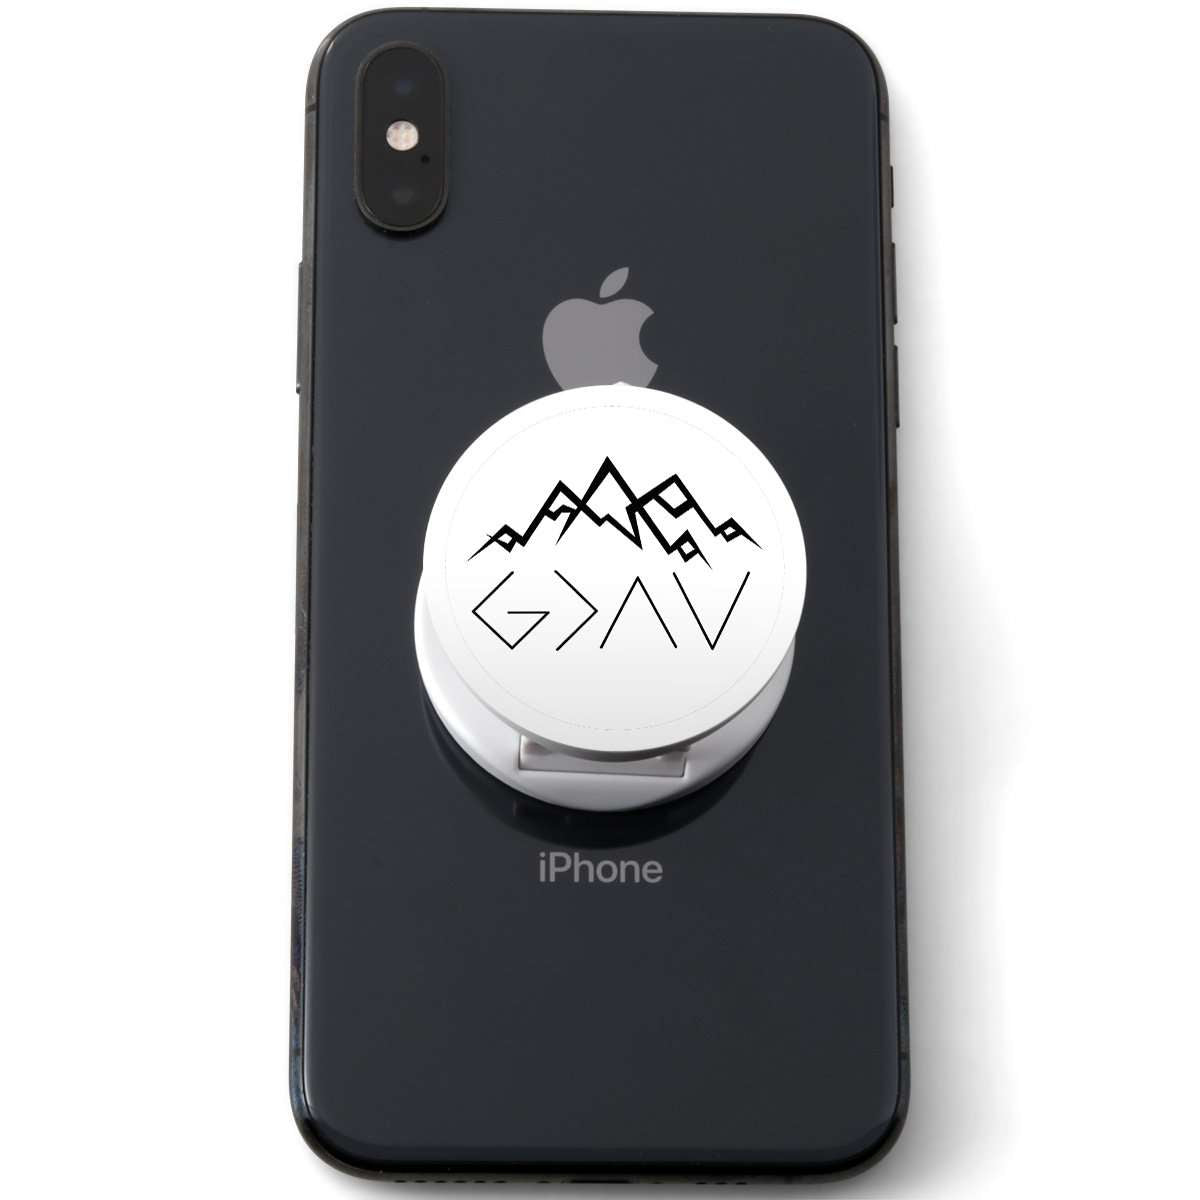 Designs by MyUtopia Shout Out:God is Greater than My Highs and Lows John 16:33 Phone Grip for Smartphones and Tablets